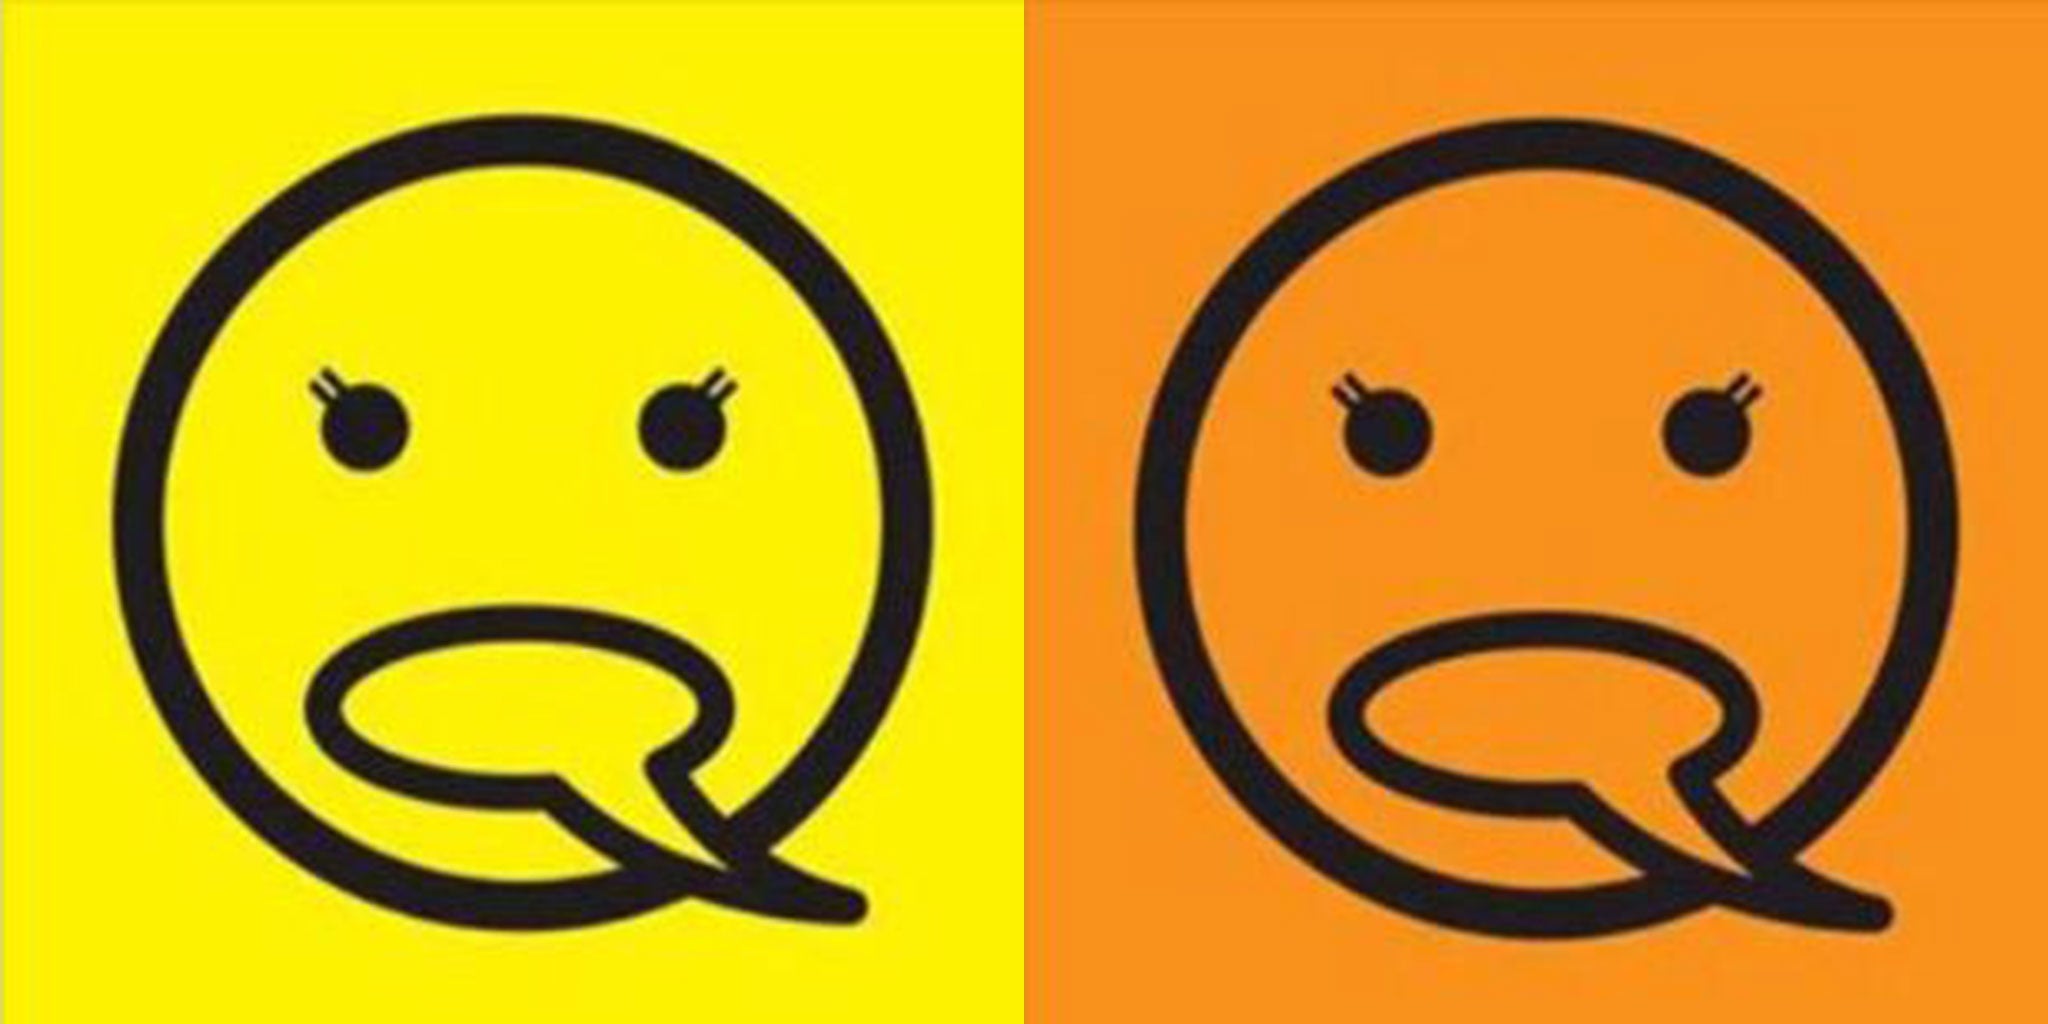 The yellow image represents people who know someone who has experienced sexual violence, and the orange image represents women who have experienced sexual violence